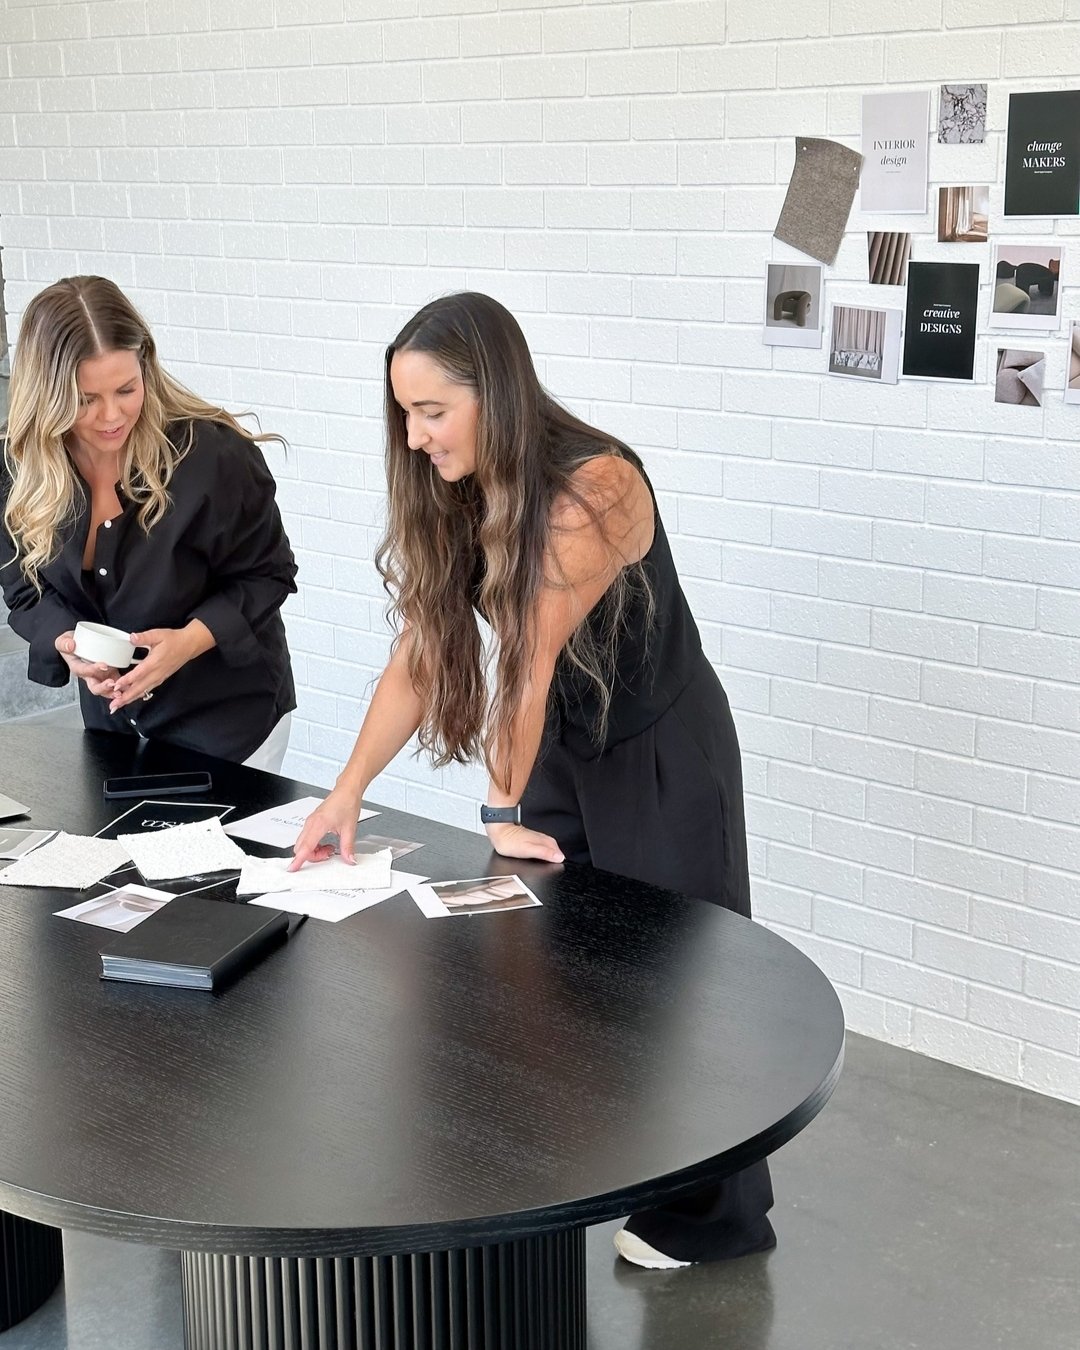 Always planning and workshopping - We are very lucky to have a team full of so many creative individuals, each bringing their own wonderful ideas and creative flair. 

#interiorstyling #interiorstylingaustralia #interiordesign #furniturepackages #fur